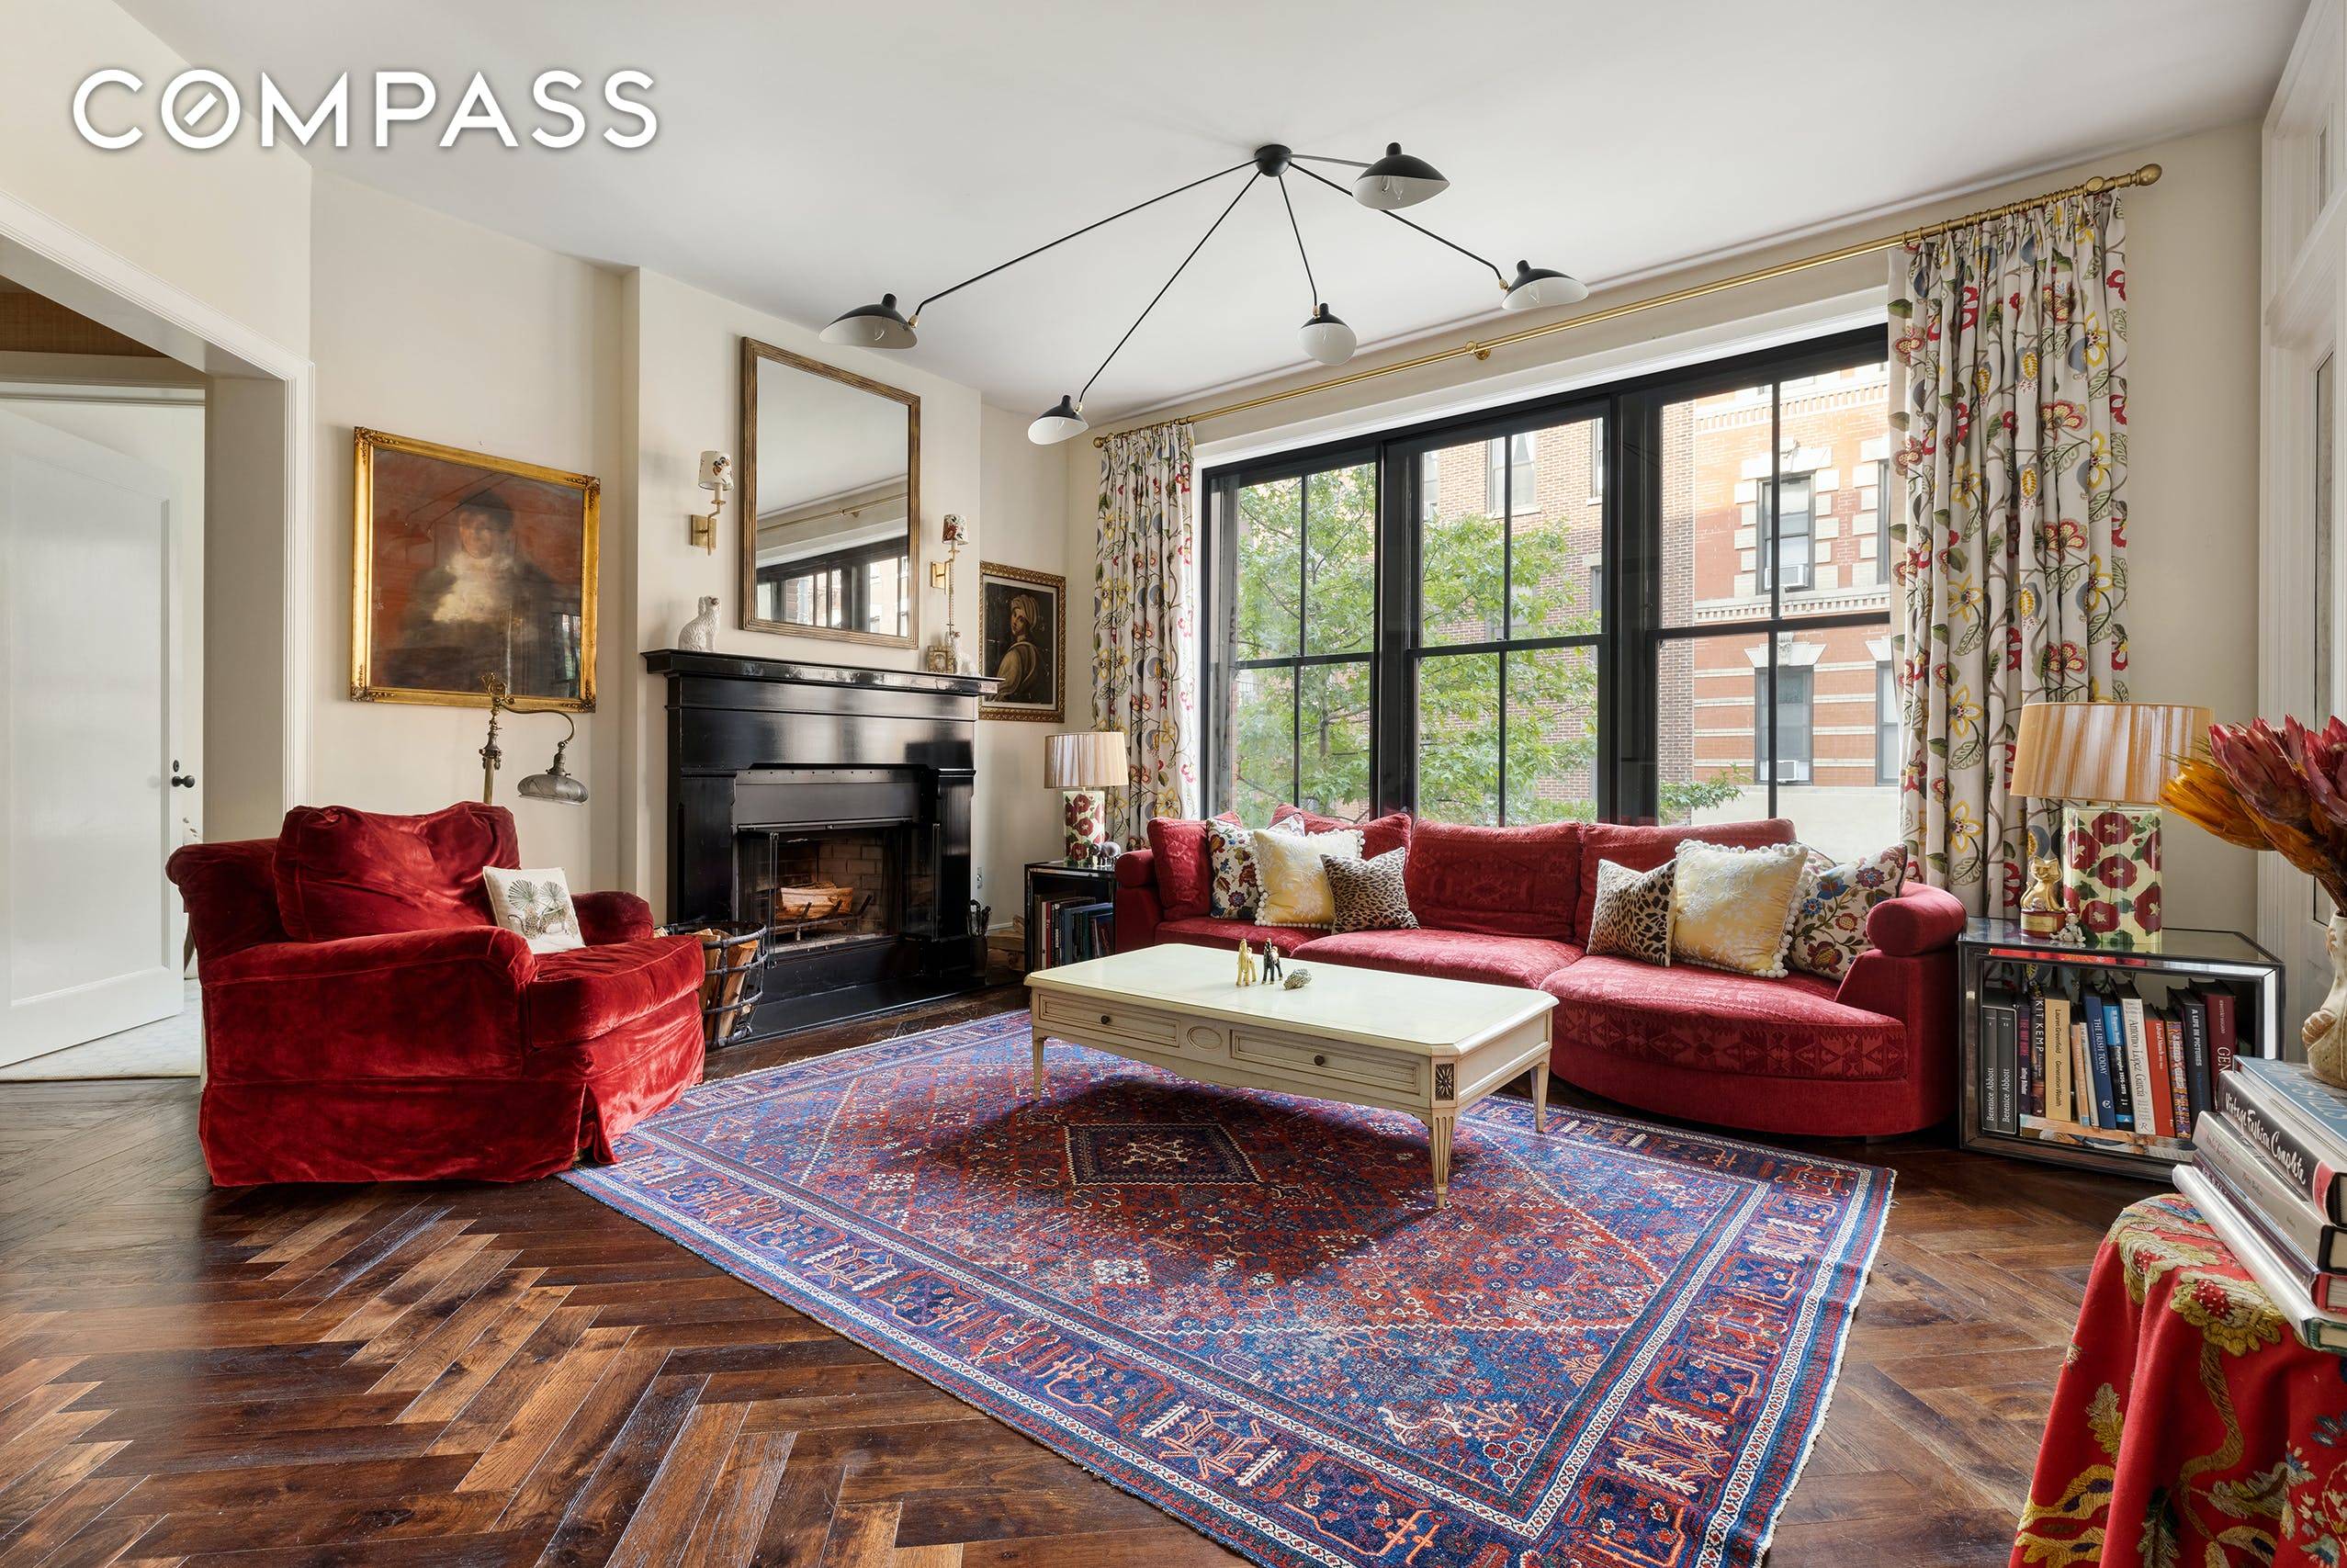 The most expansive two bedroom, two bath home in 211 Elizabeth Street s prized collection is now on the market.